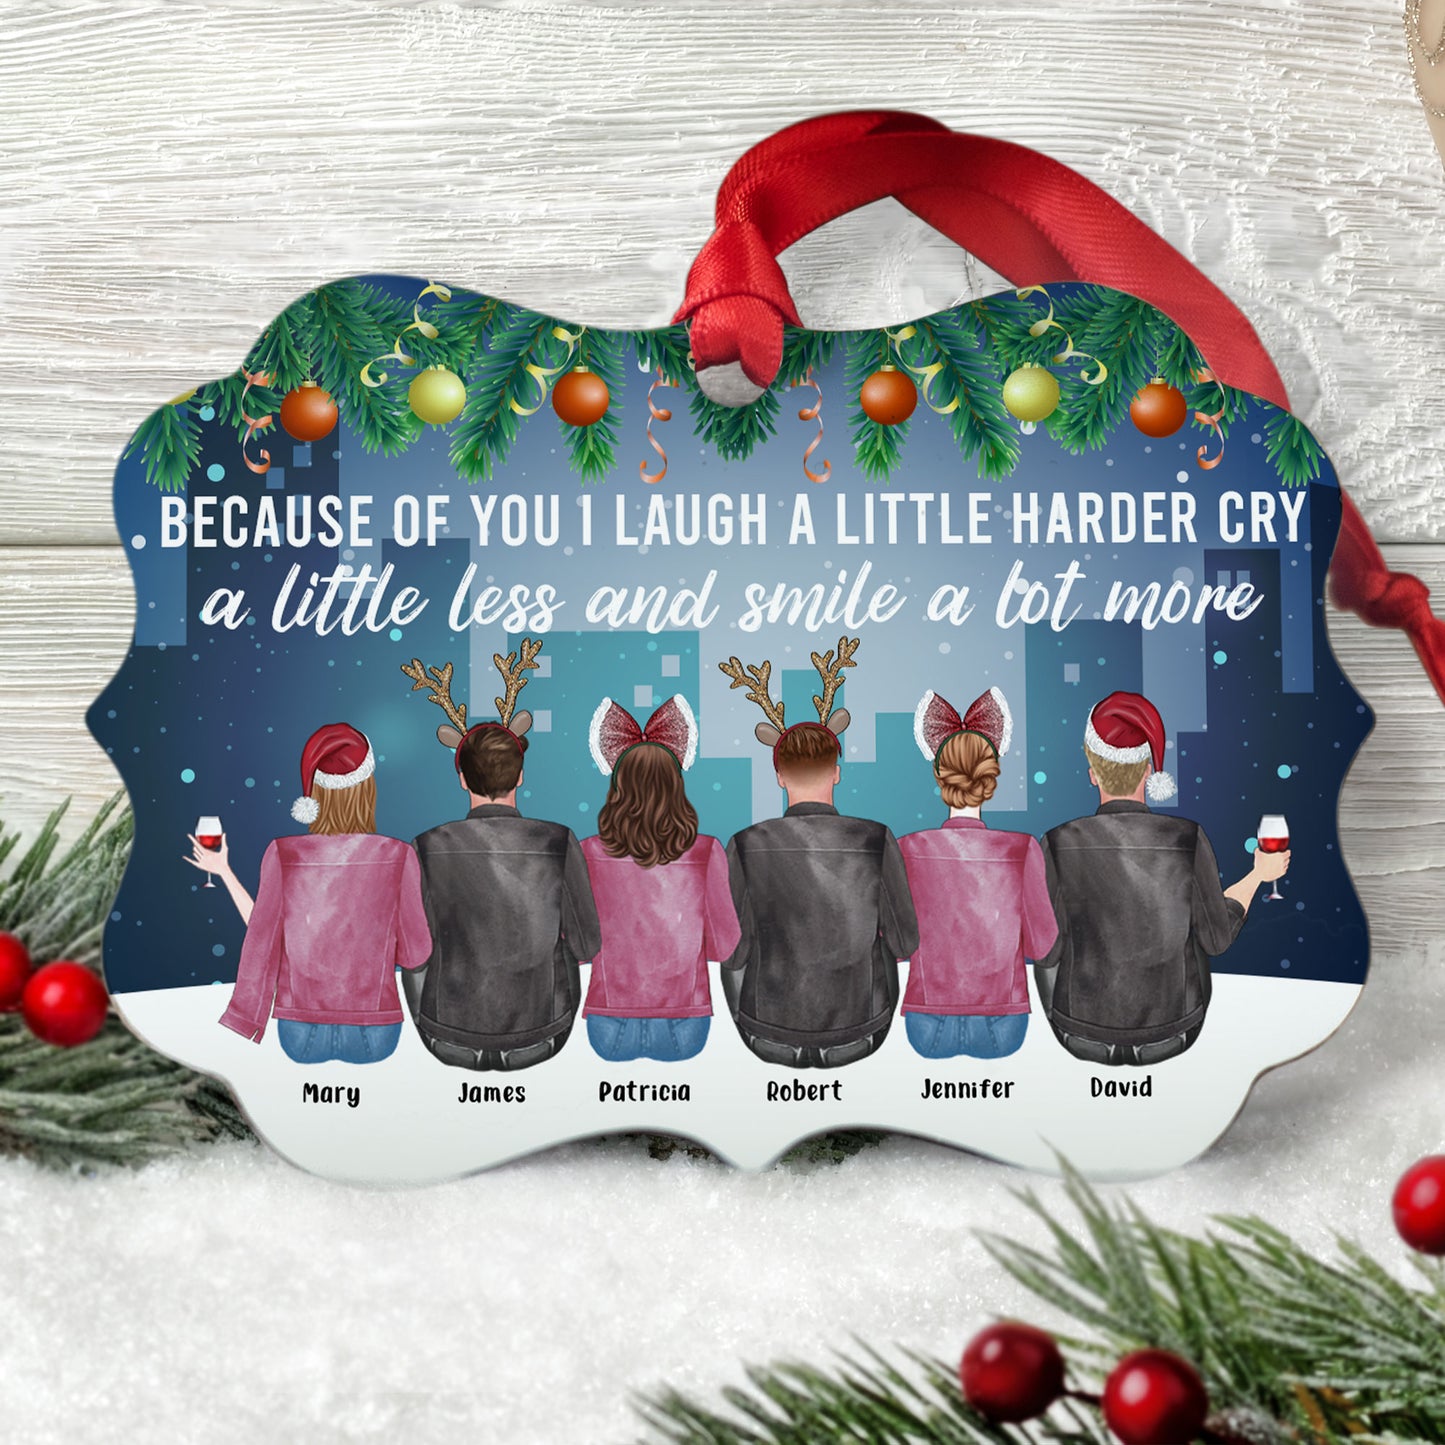 Because of You I Laugh a Little Harder - Personalized Aluminum Ornament - Christmas Gift For Sibling